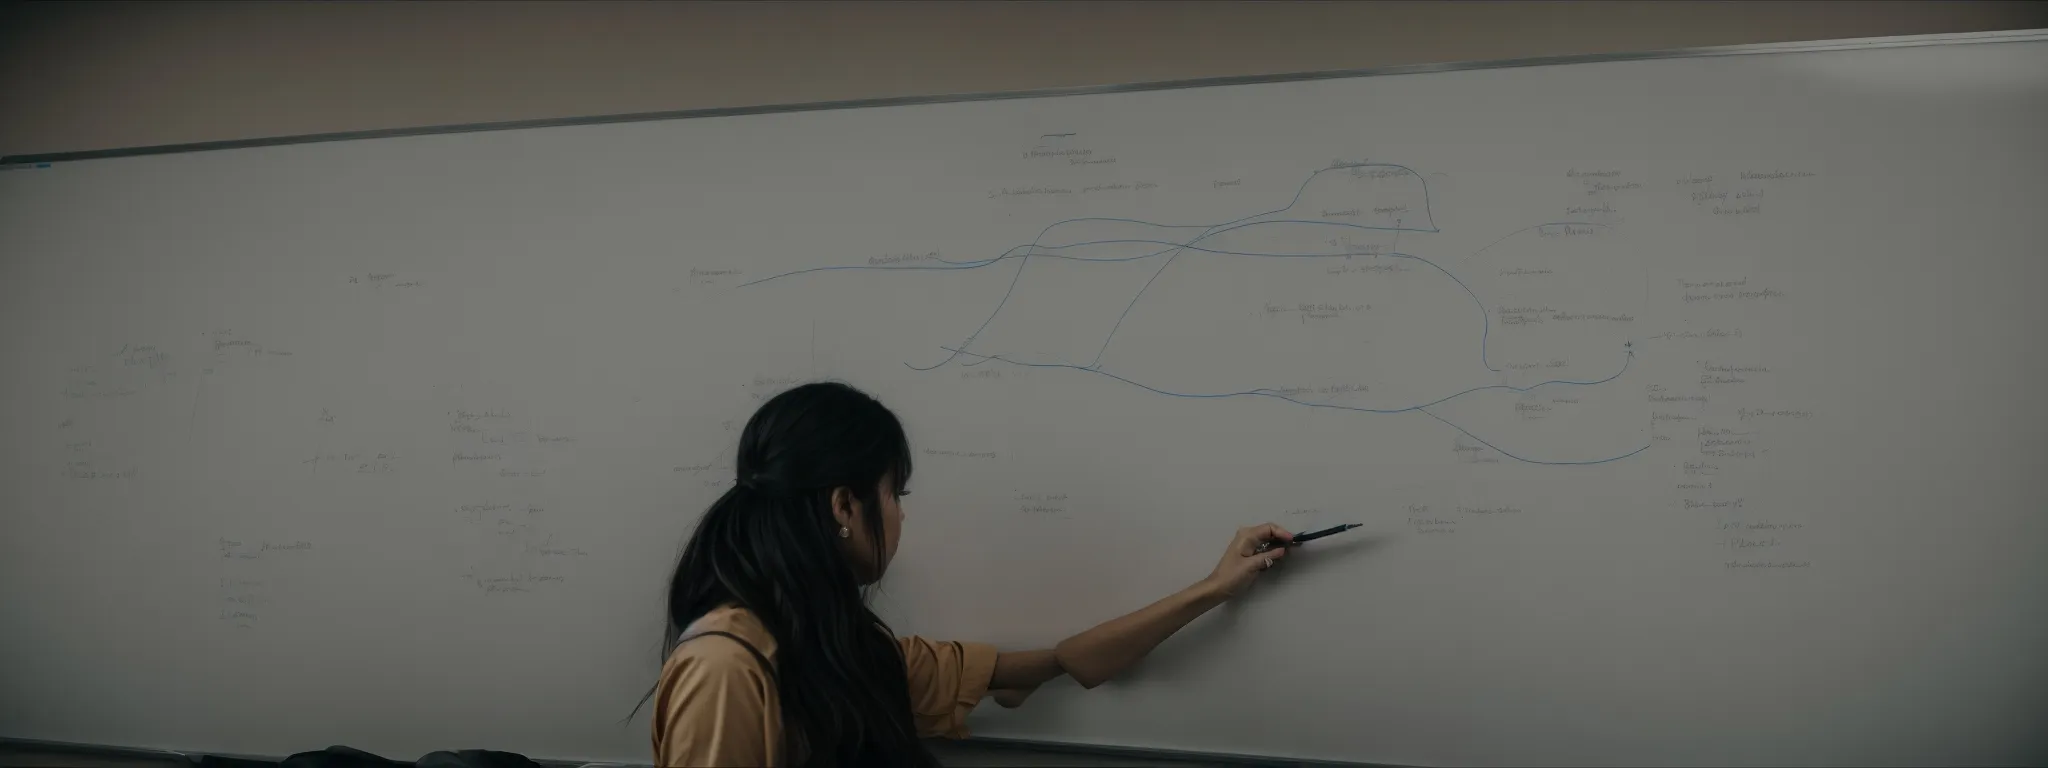 a person at a large whiteboard strategizing content flow and connection points.